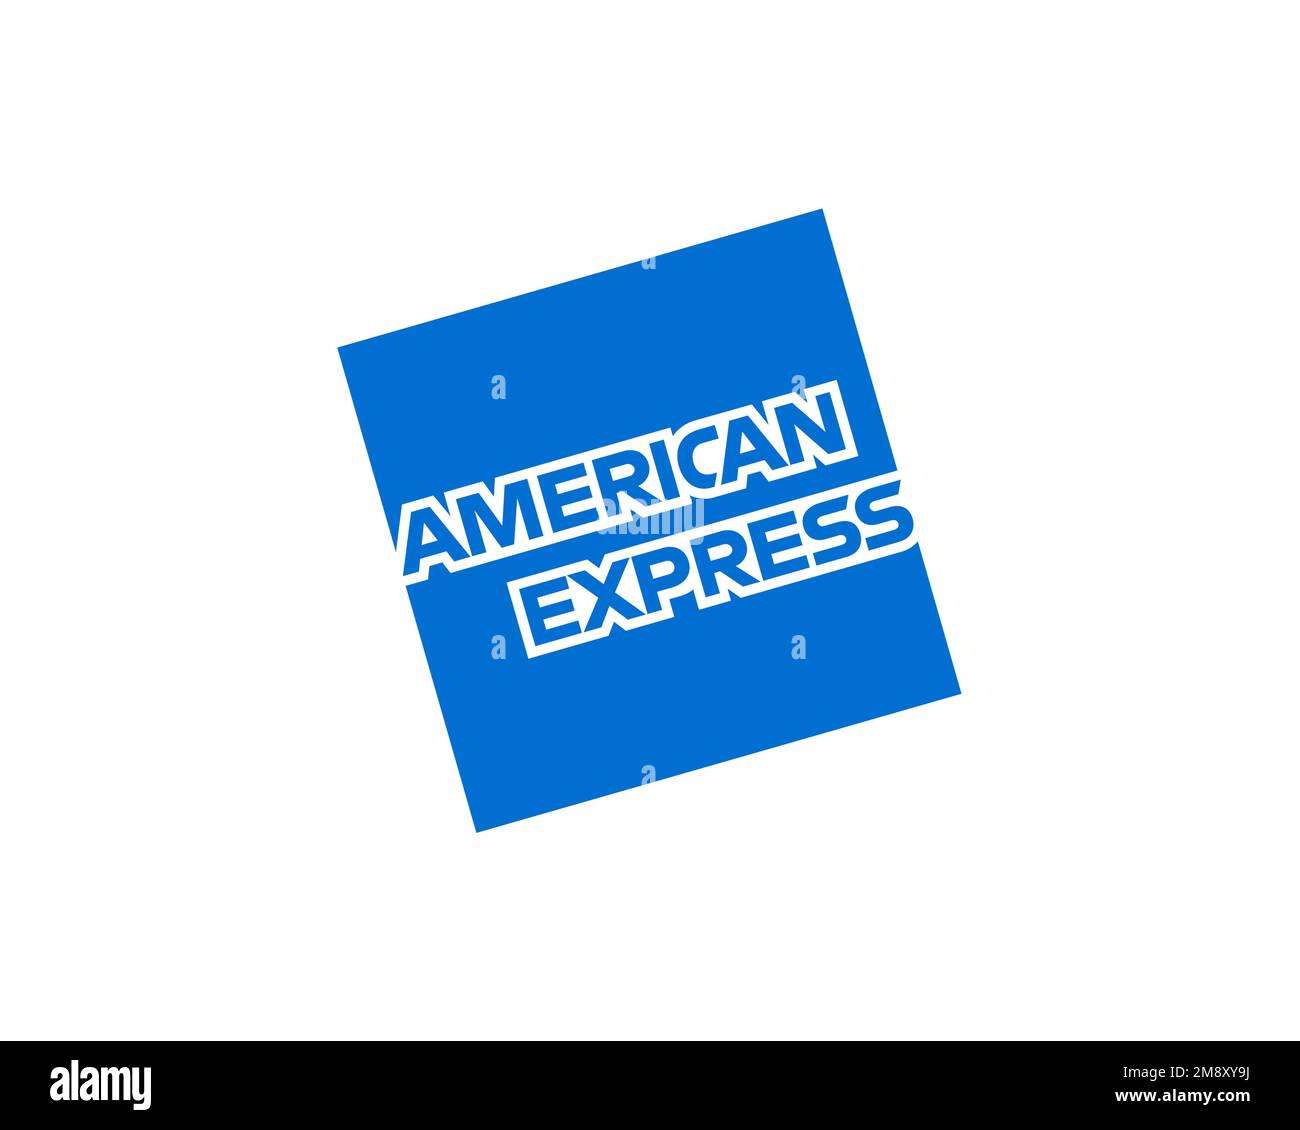 American Express, rotated logo, white background Stock Photo